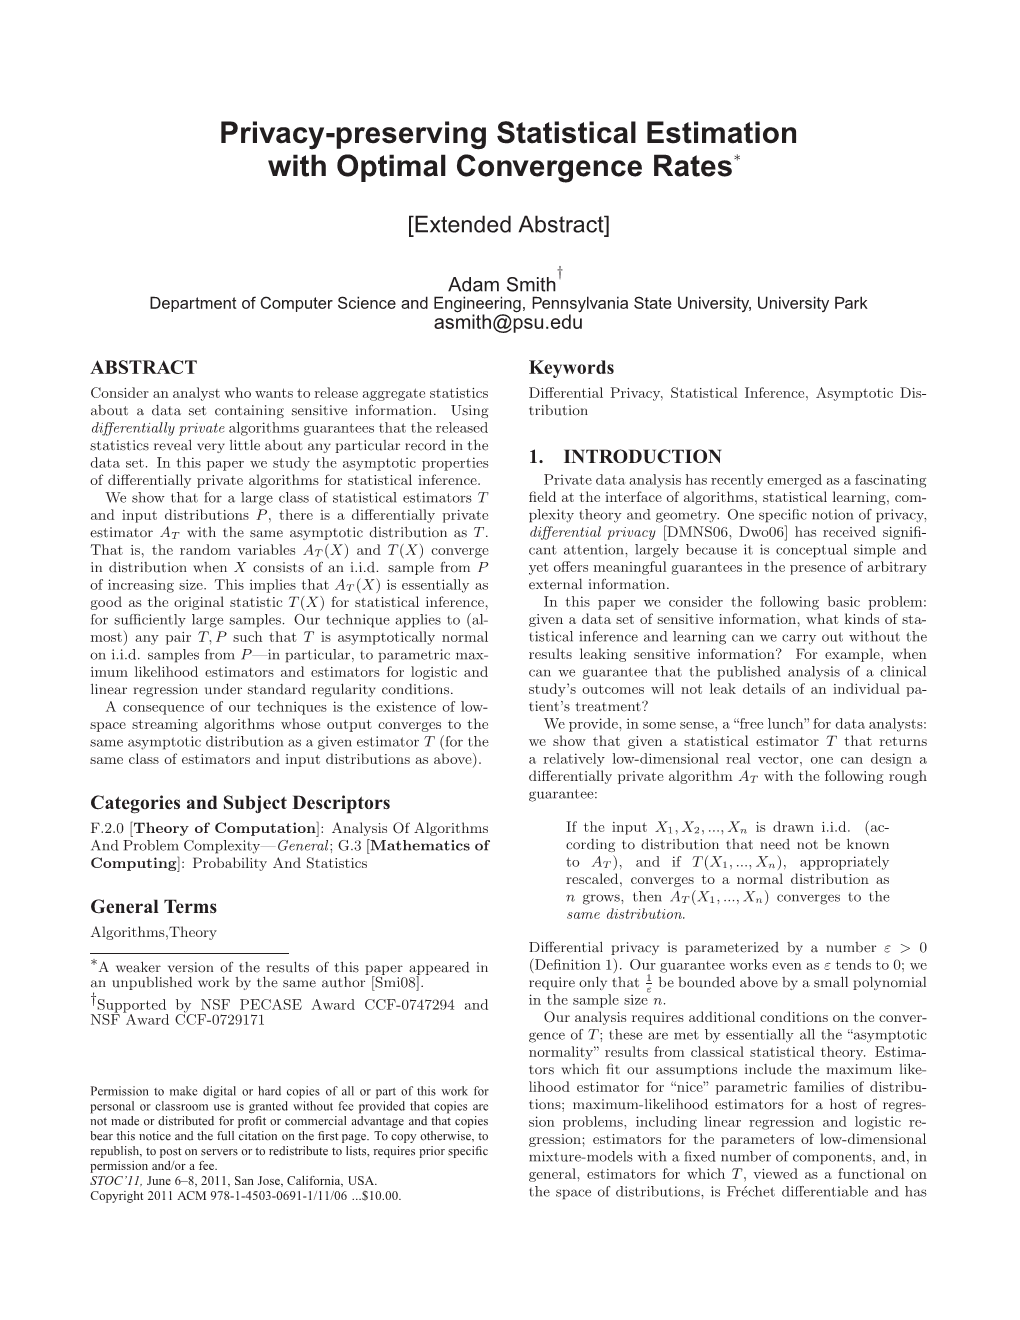 Privacy-Preserving Statistical Estimation with Optimal Convergence Rates∗